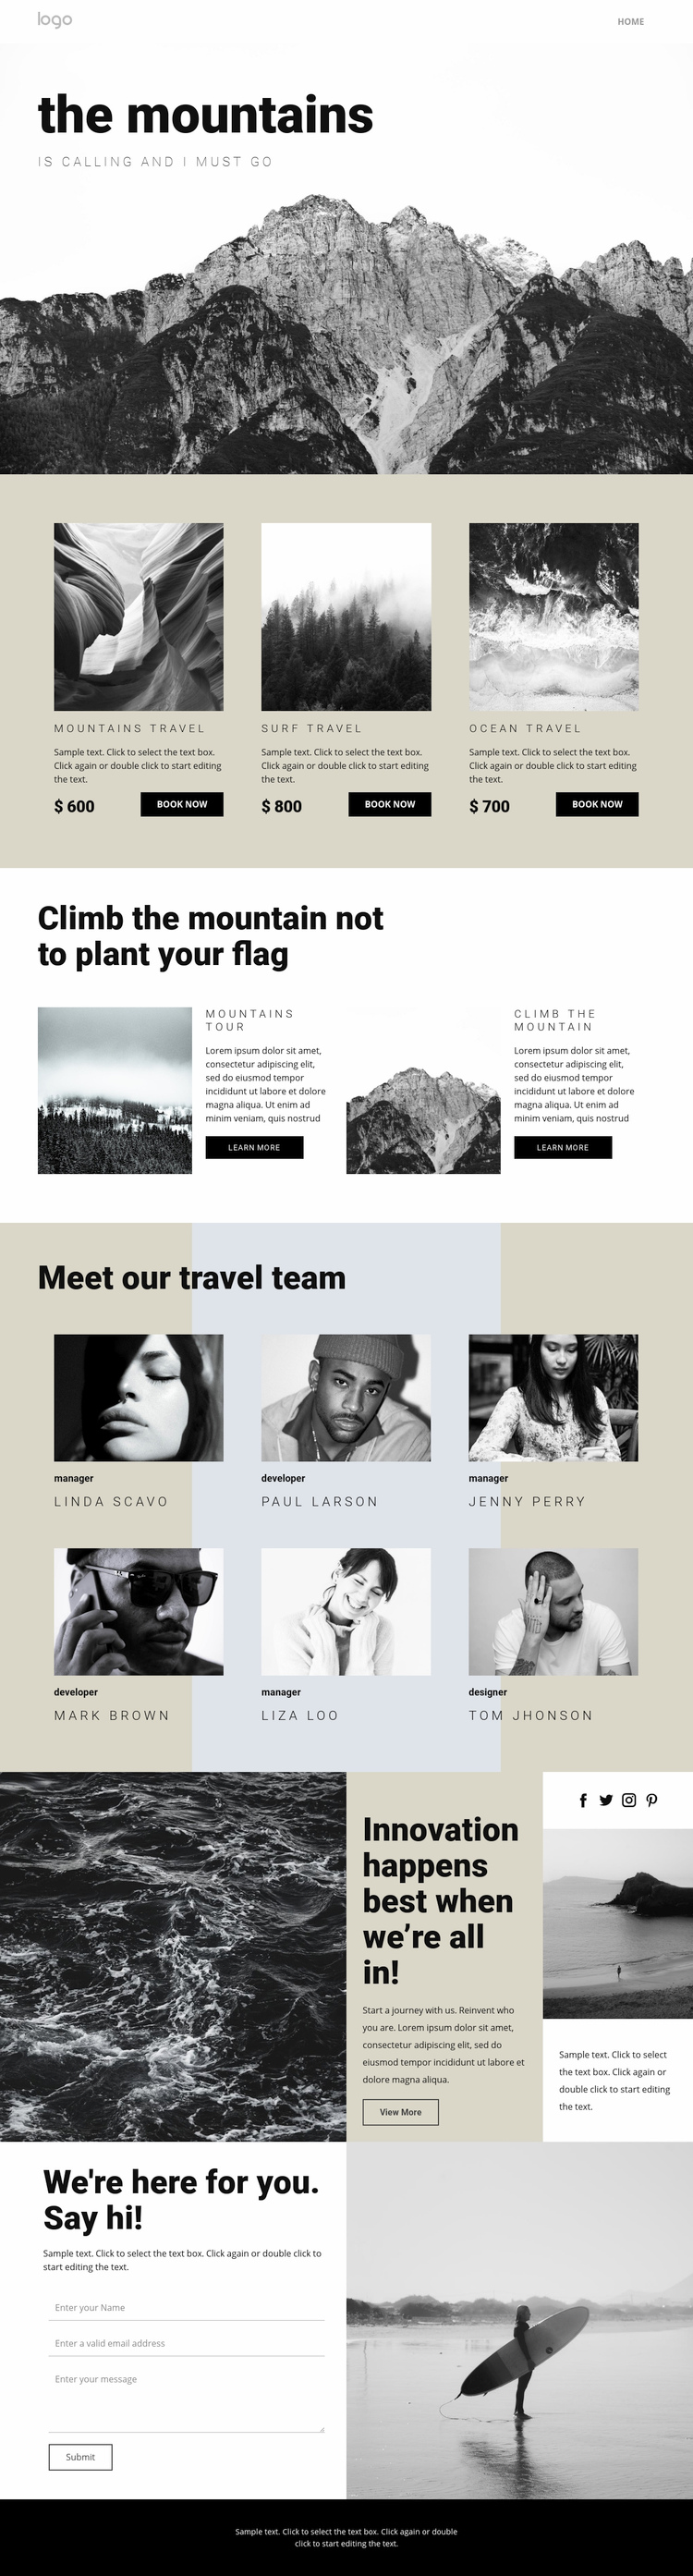 Agency for people who travel Squarespace Template Alternative